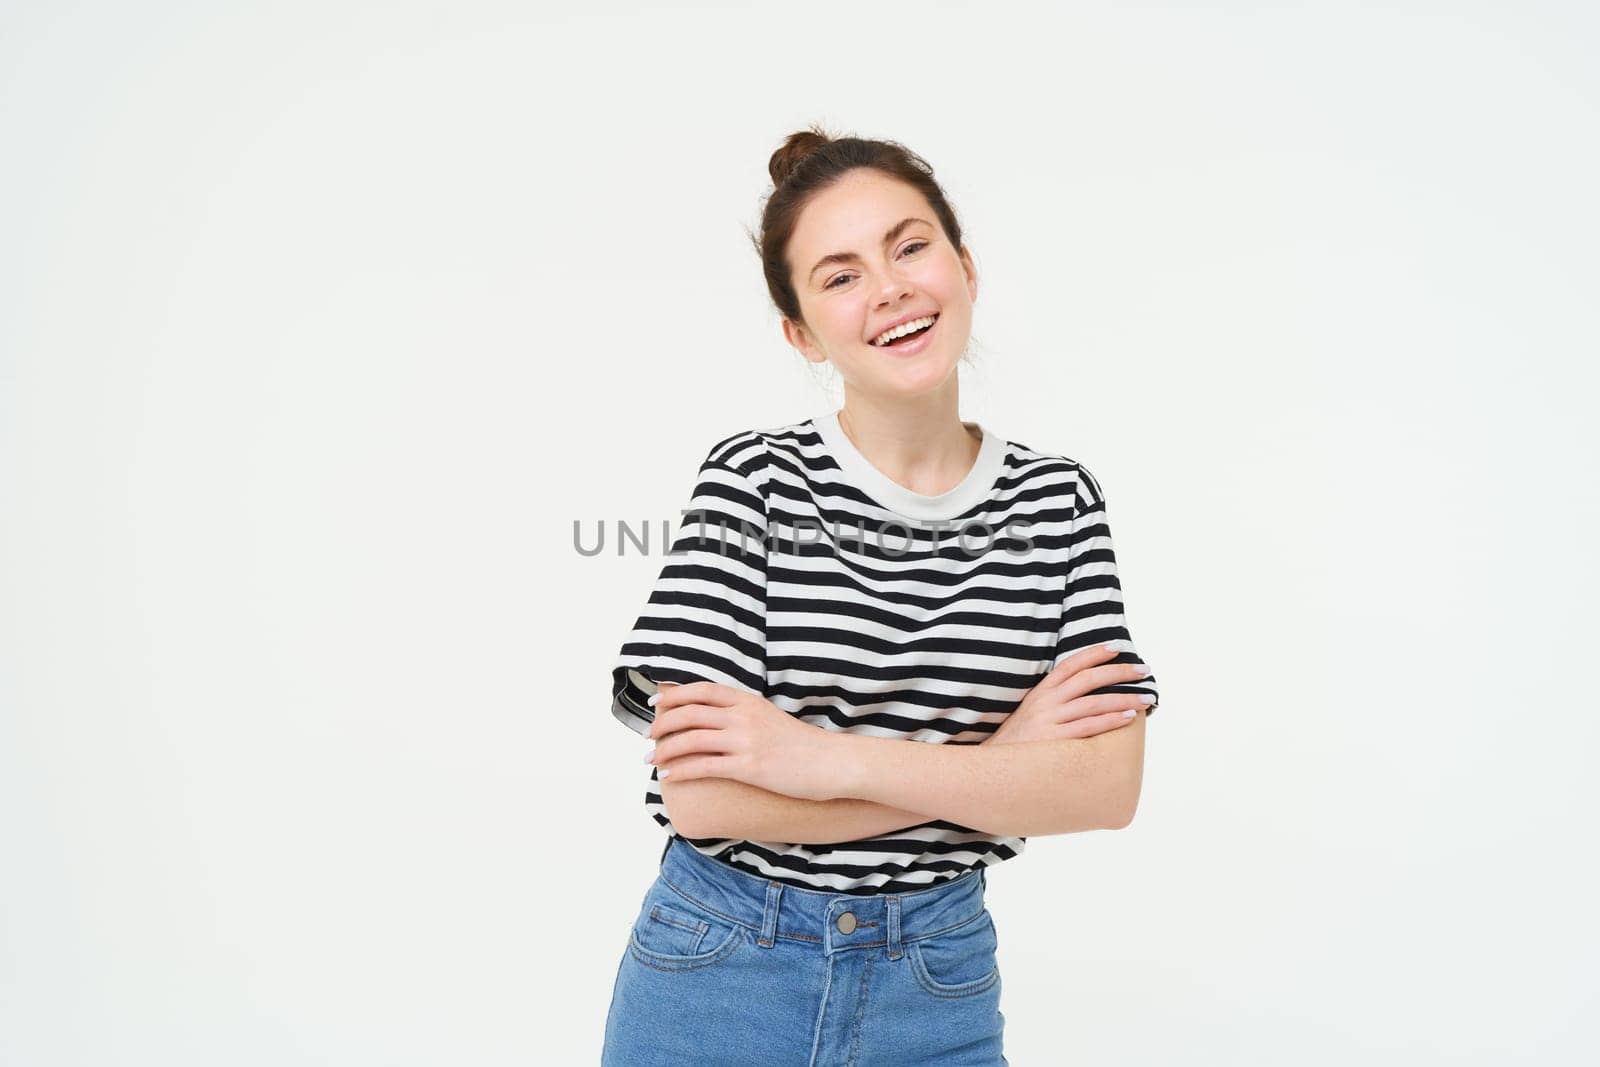 Image of charismatic young woman in striped t-shirt and jeans, looking confident and happy, smiling at camera, candid emotions, white background.